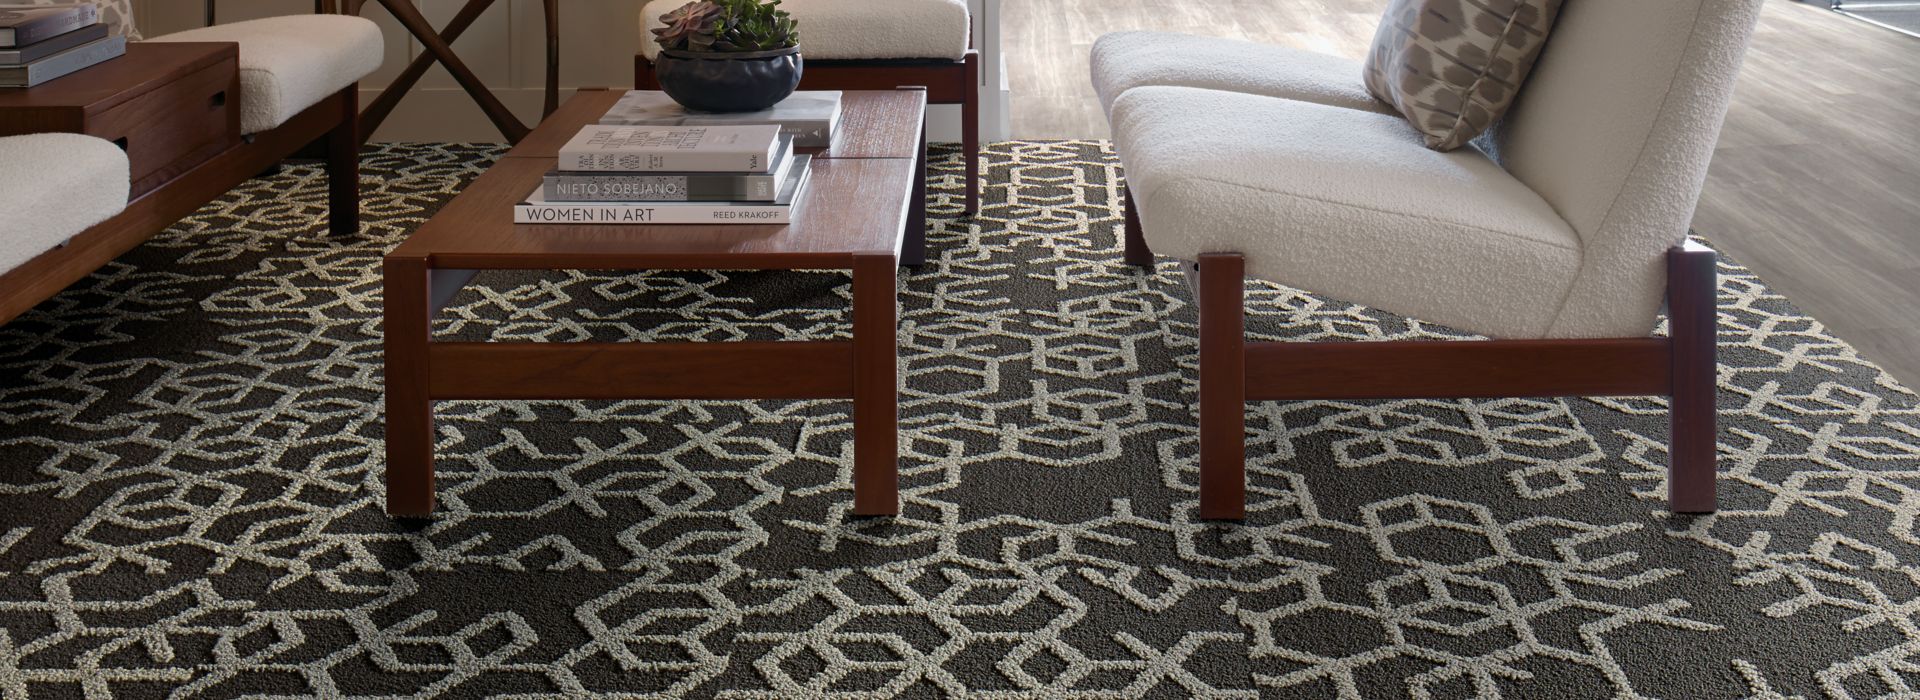 Interface Bee's Knees carpet tile and LVT in seating area numéro d’image 1